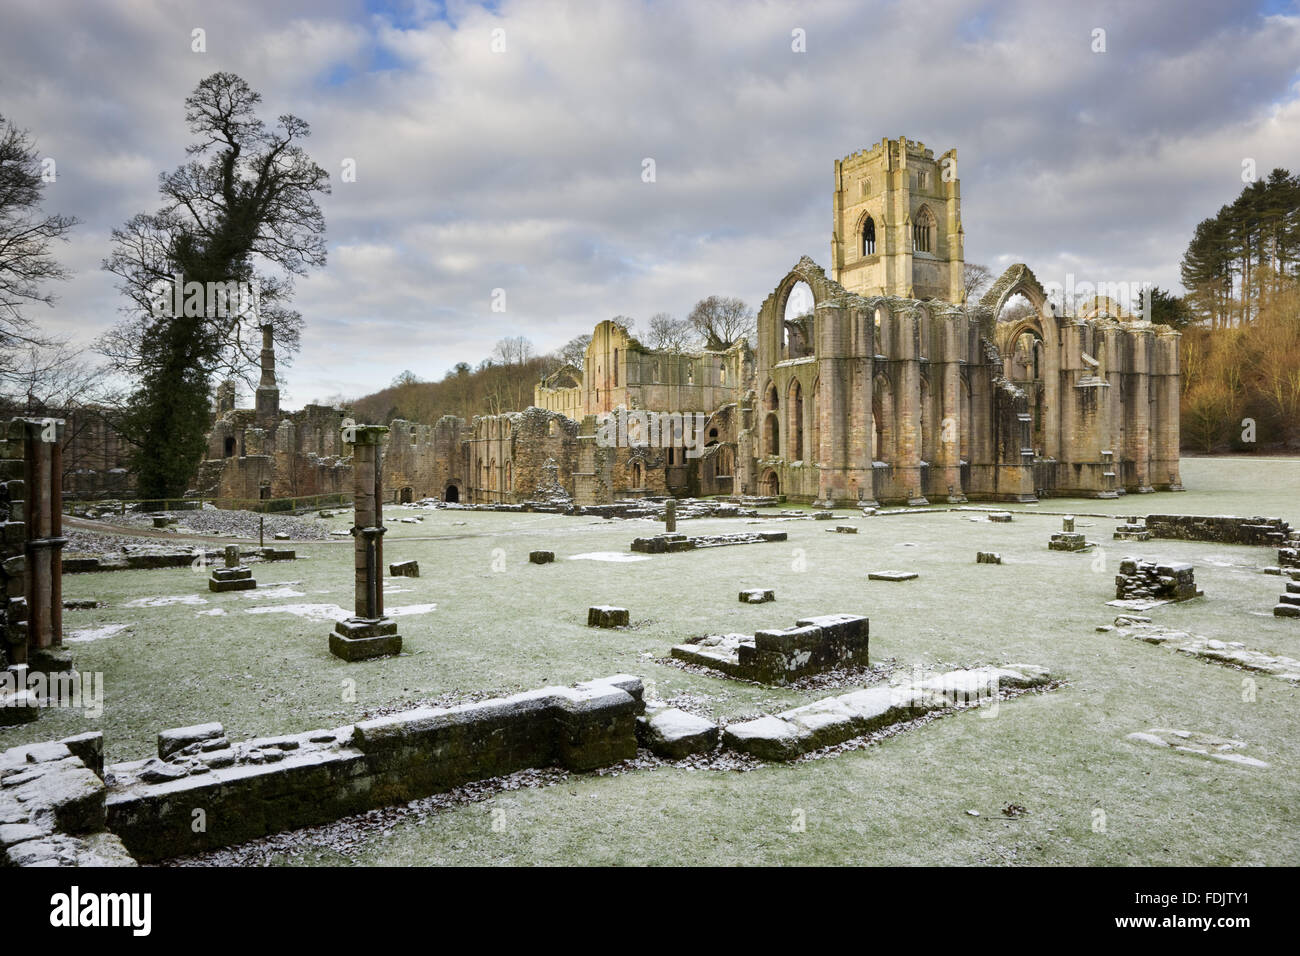 A winter view towards the east end of the Abbey church showing the great east window arch at Fountains Abbey, North Yorkshire. Remains of the monks' infirmary are visible in the foreground. The Cistercian community of monks was founded here in 1132 but wa Stock Photo